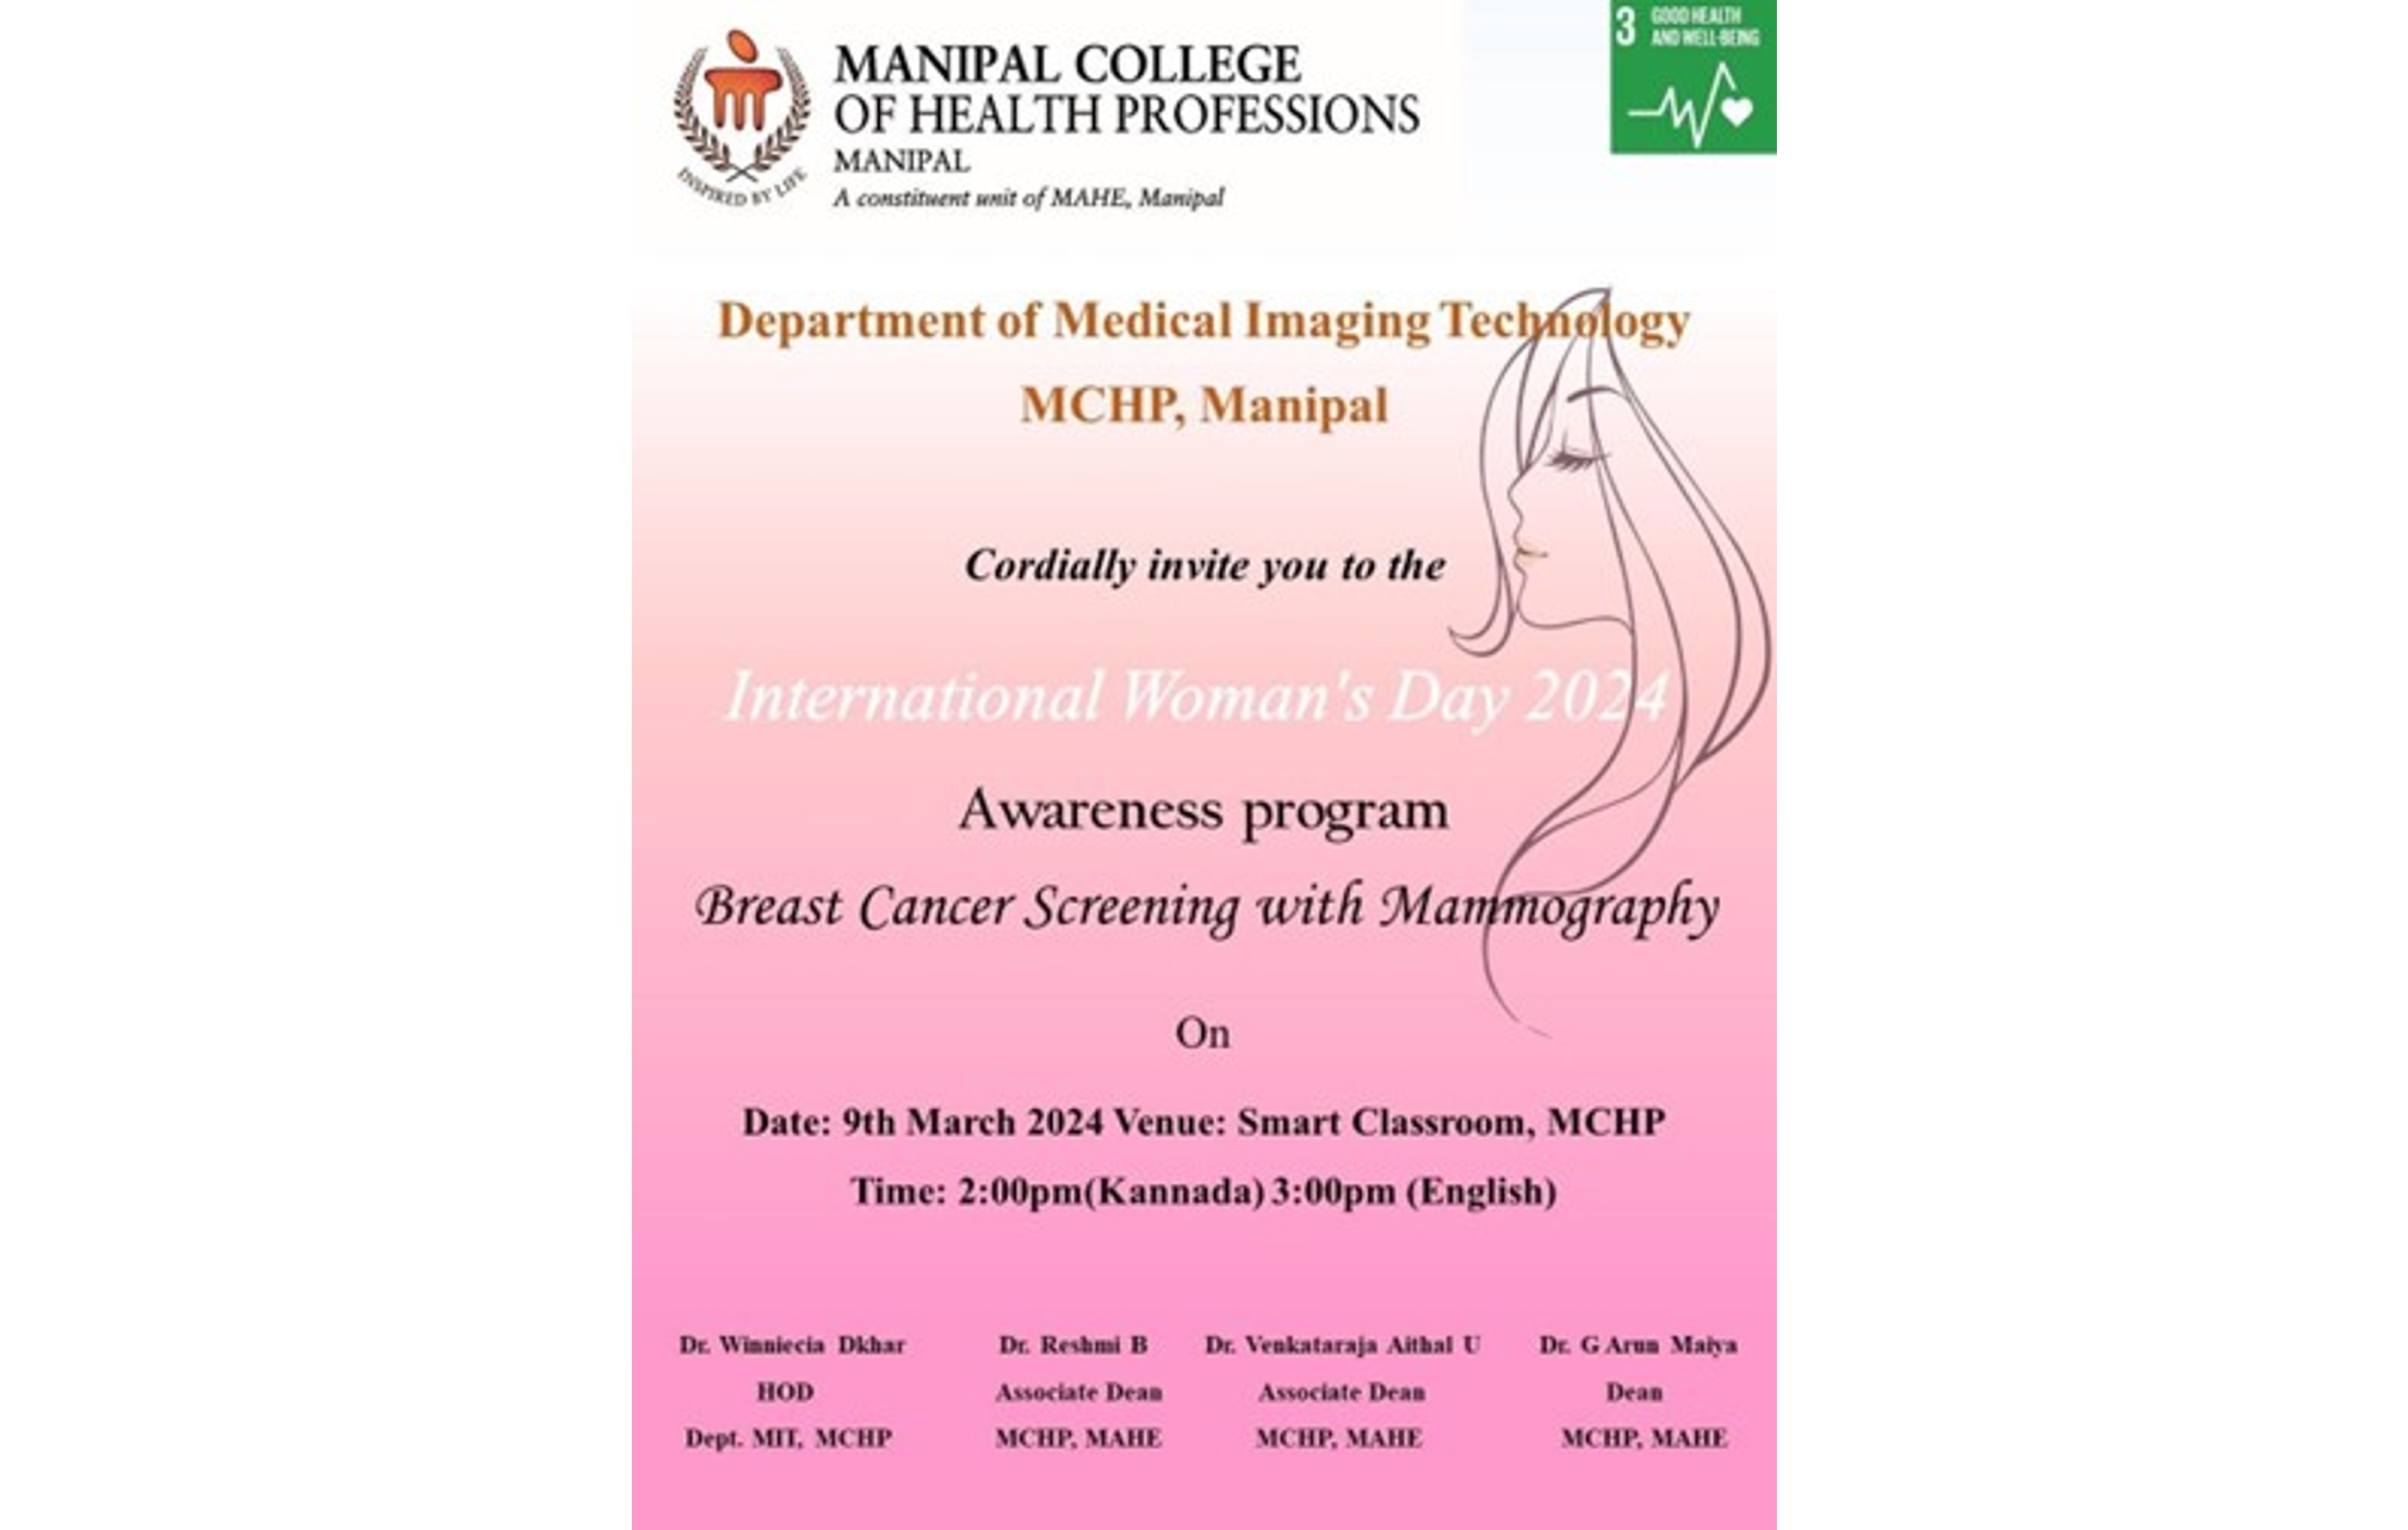 Awareness program on Breast Cancer Screening with Mammography by Department of MIT, MCHP, 365Ͷע--ֱӪվ@